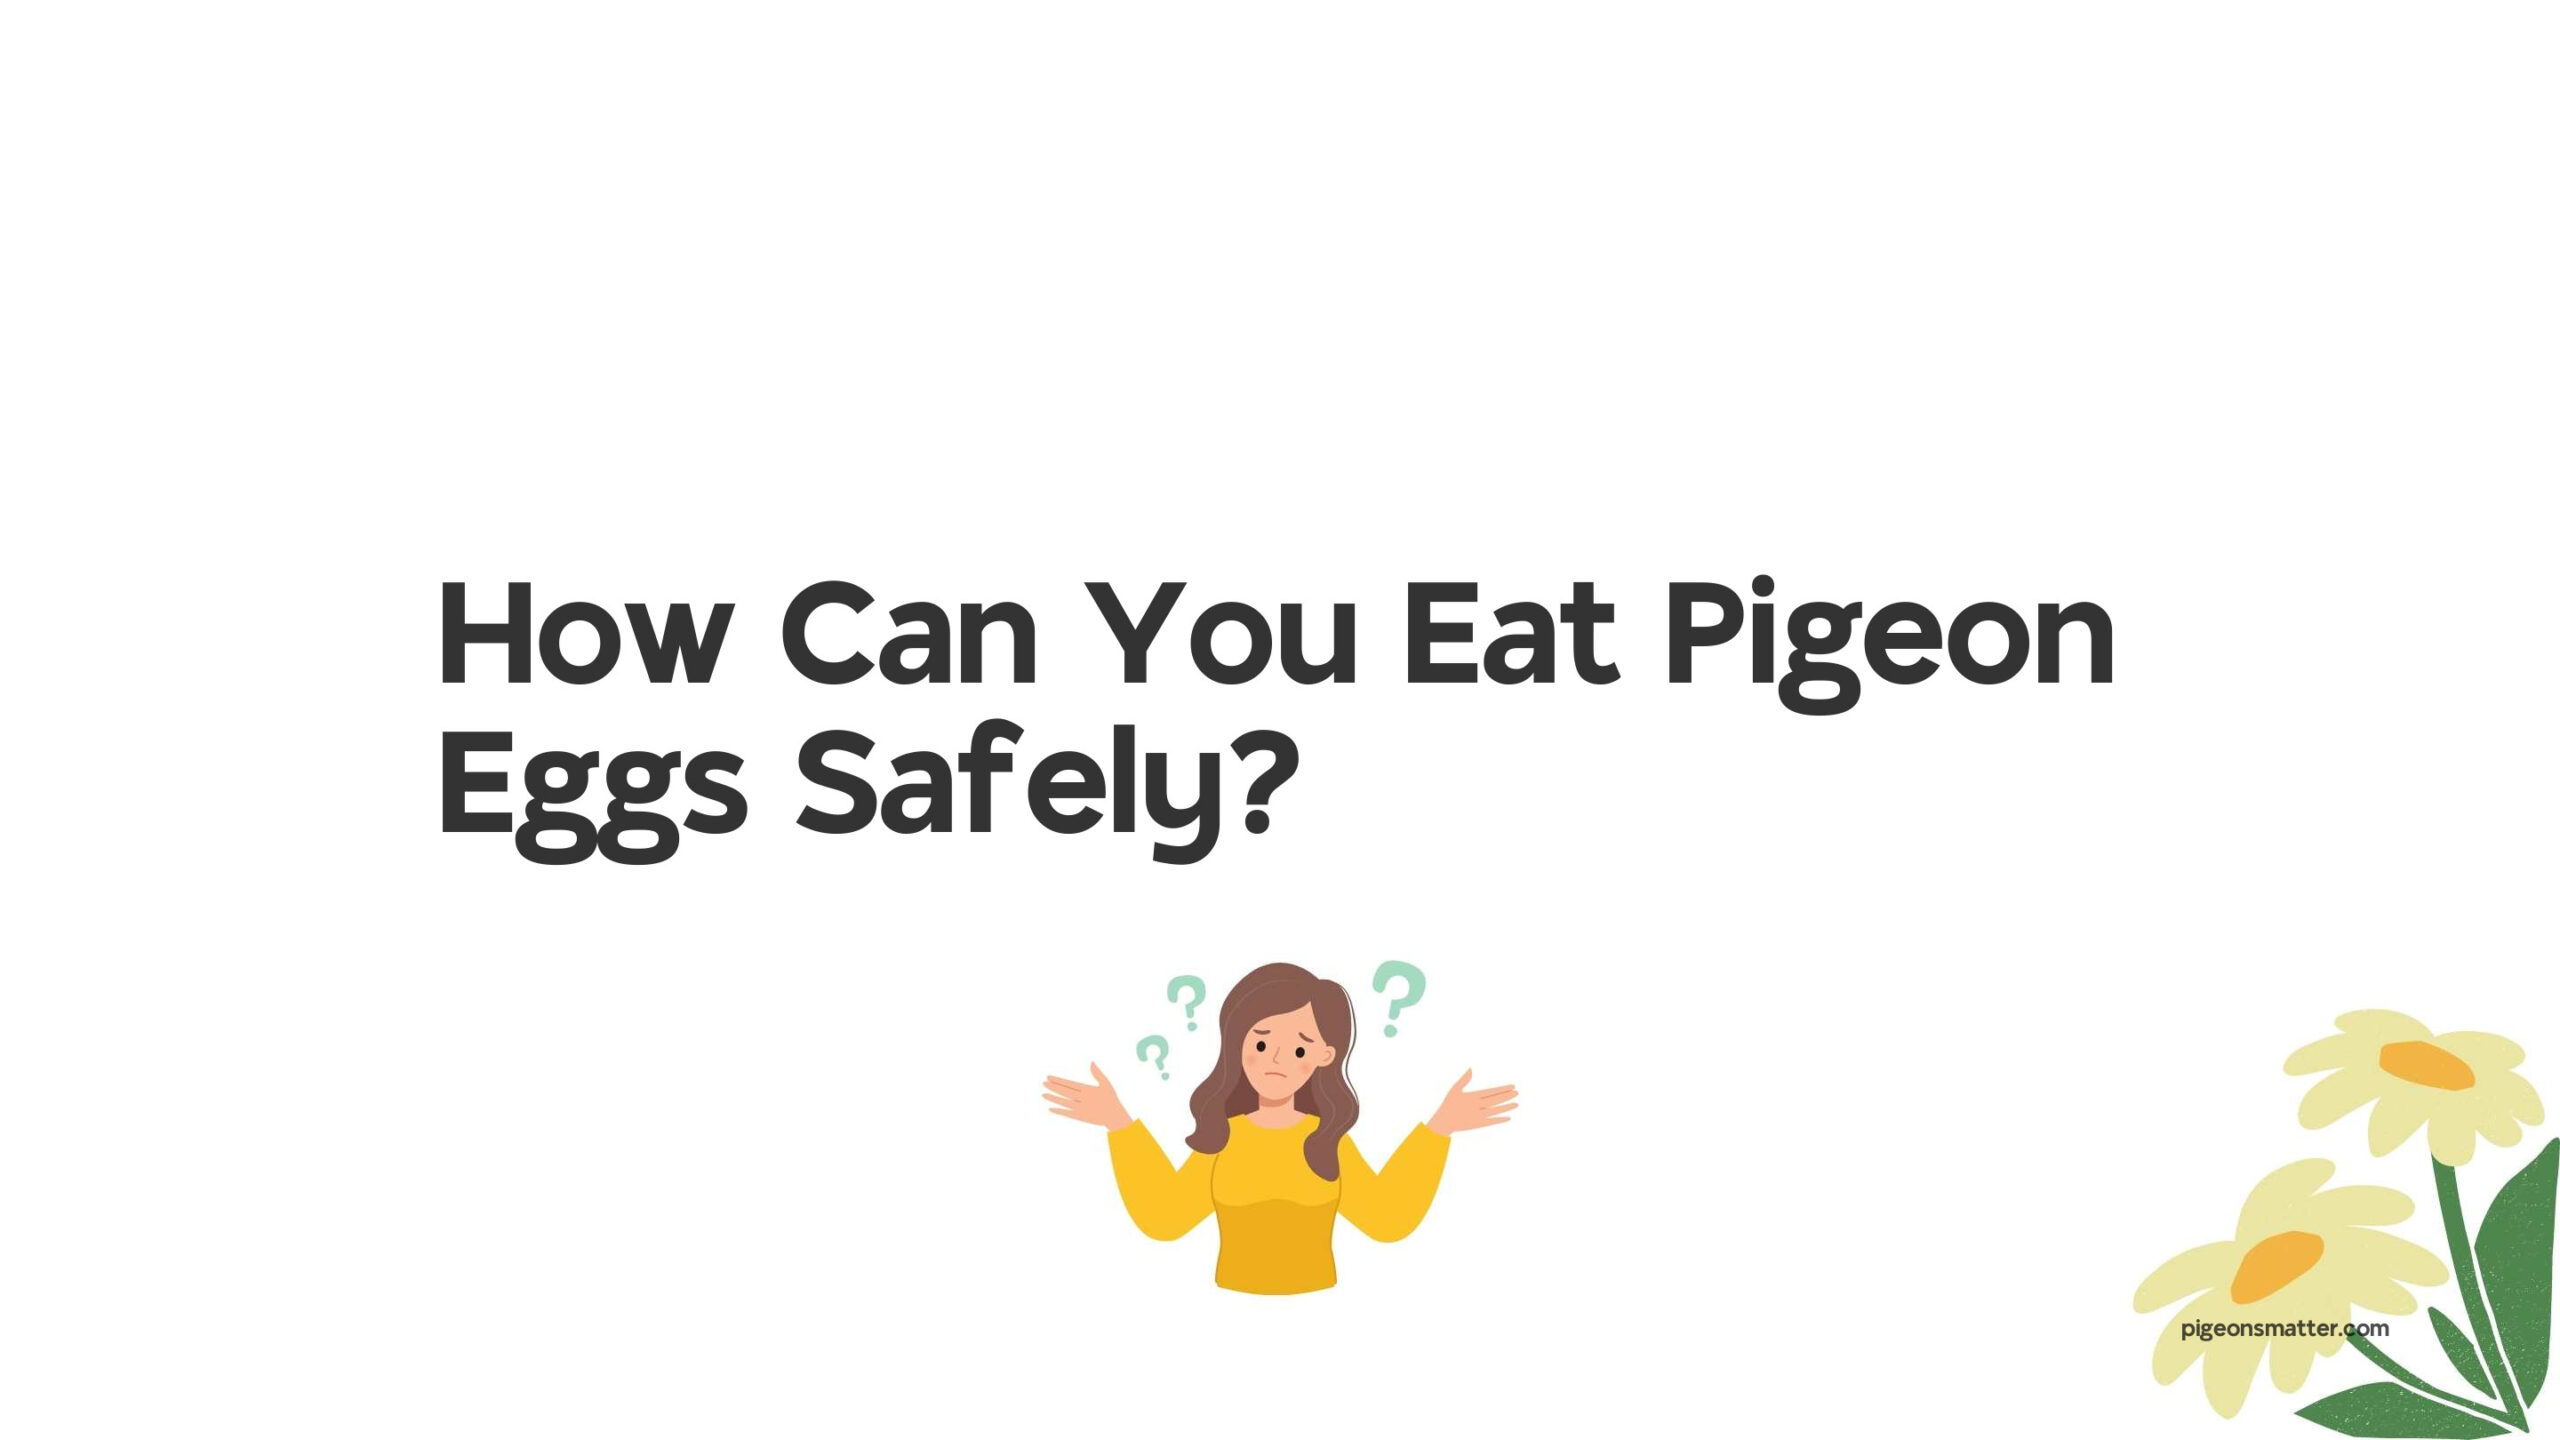 How Can You Eat Pigeon Eggs Safely?